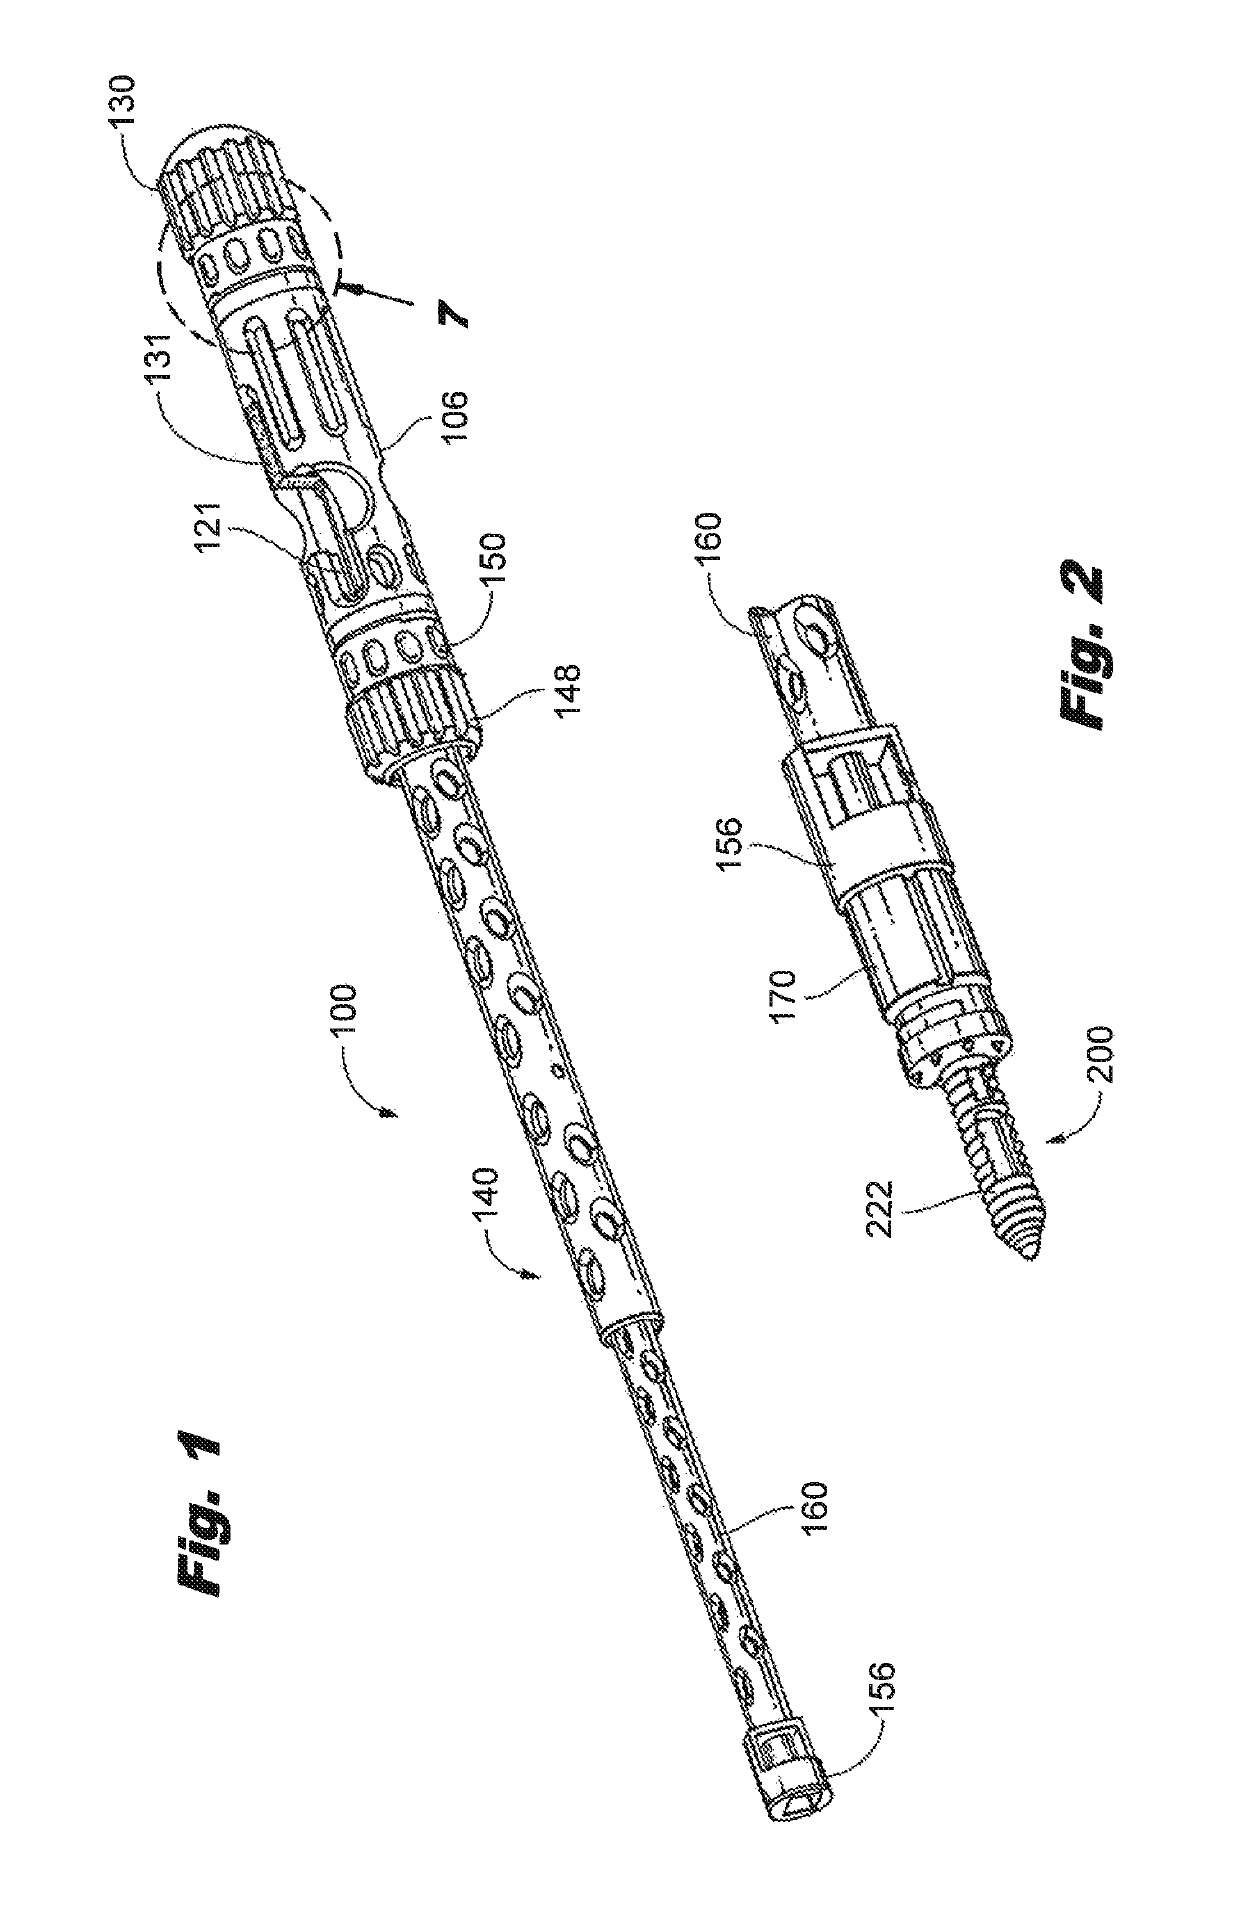 Interspinous implant insertion instrument with staggered path implant deployment mechanism